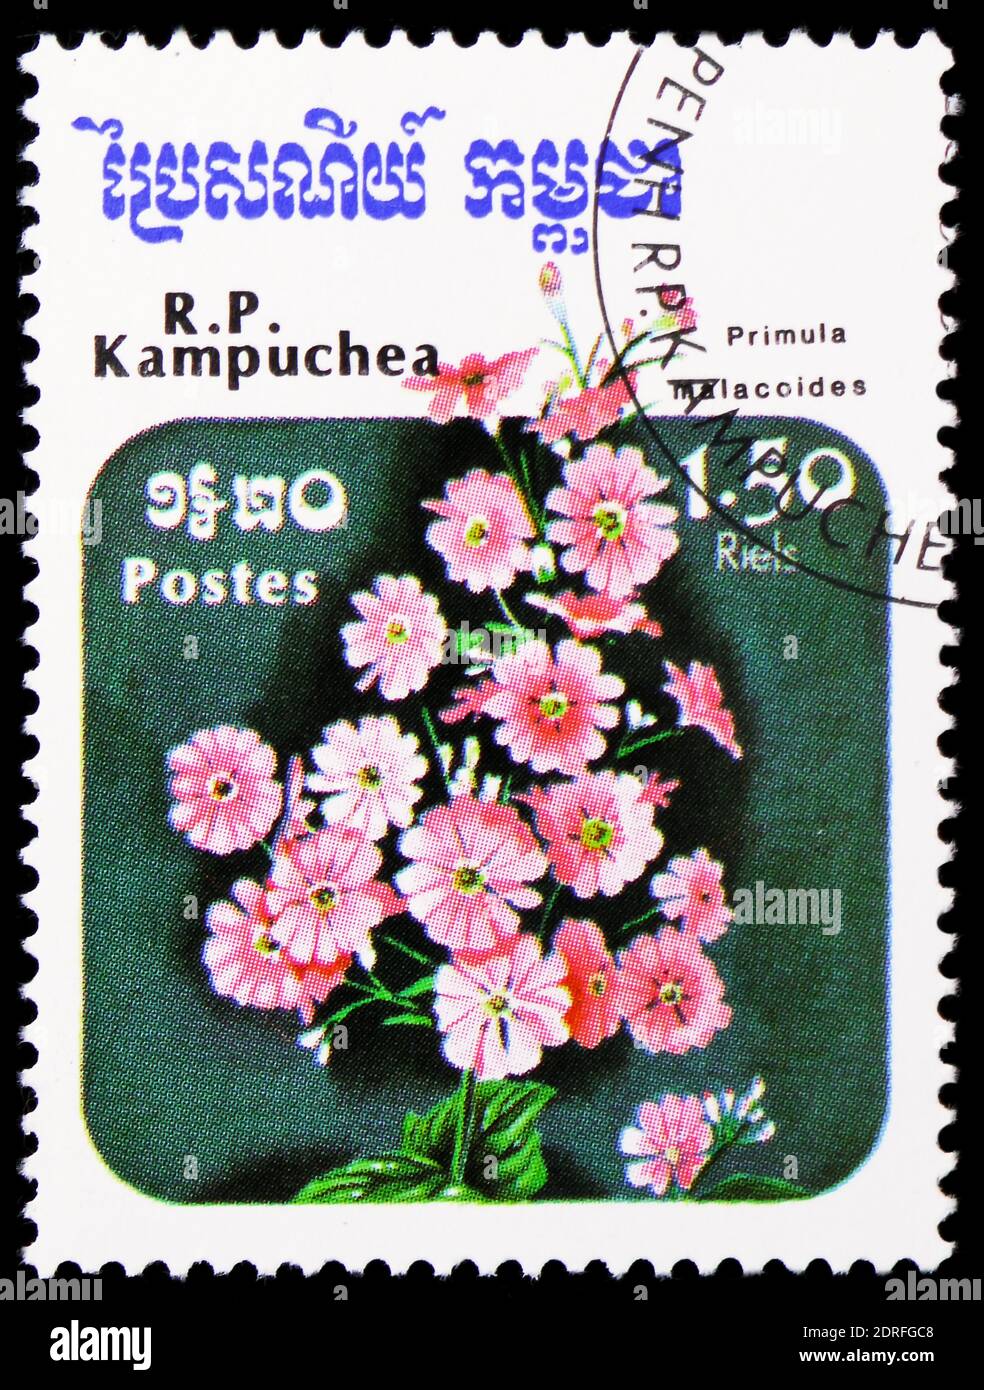 MOSCOW, RUSSIA - JANUARY 4, 2019: A stamp printed in Kampuchea (Cambodia) shows Primula Malacoides, Flowers serie, circa 1985 Stock Photo